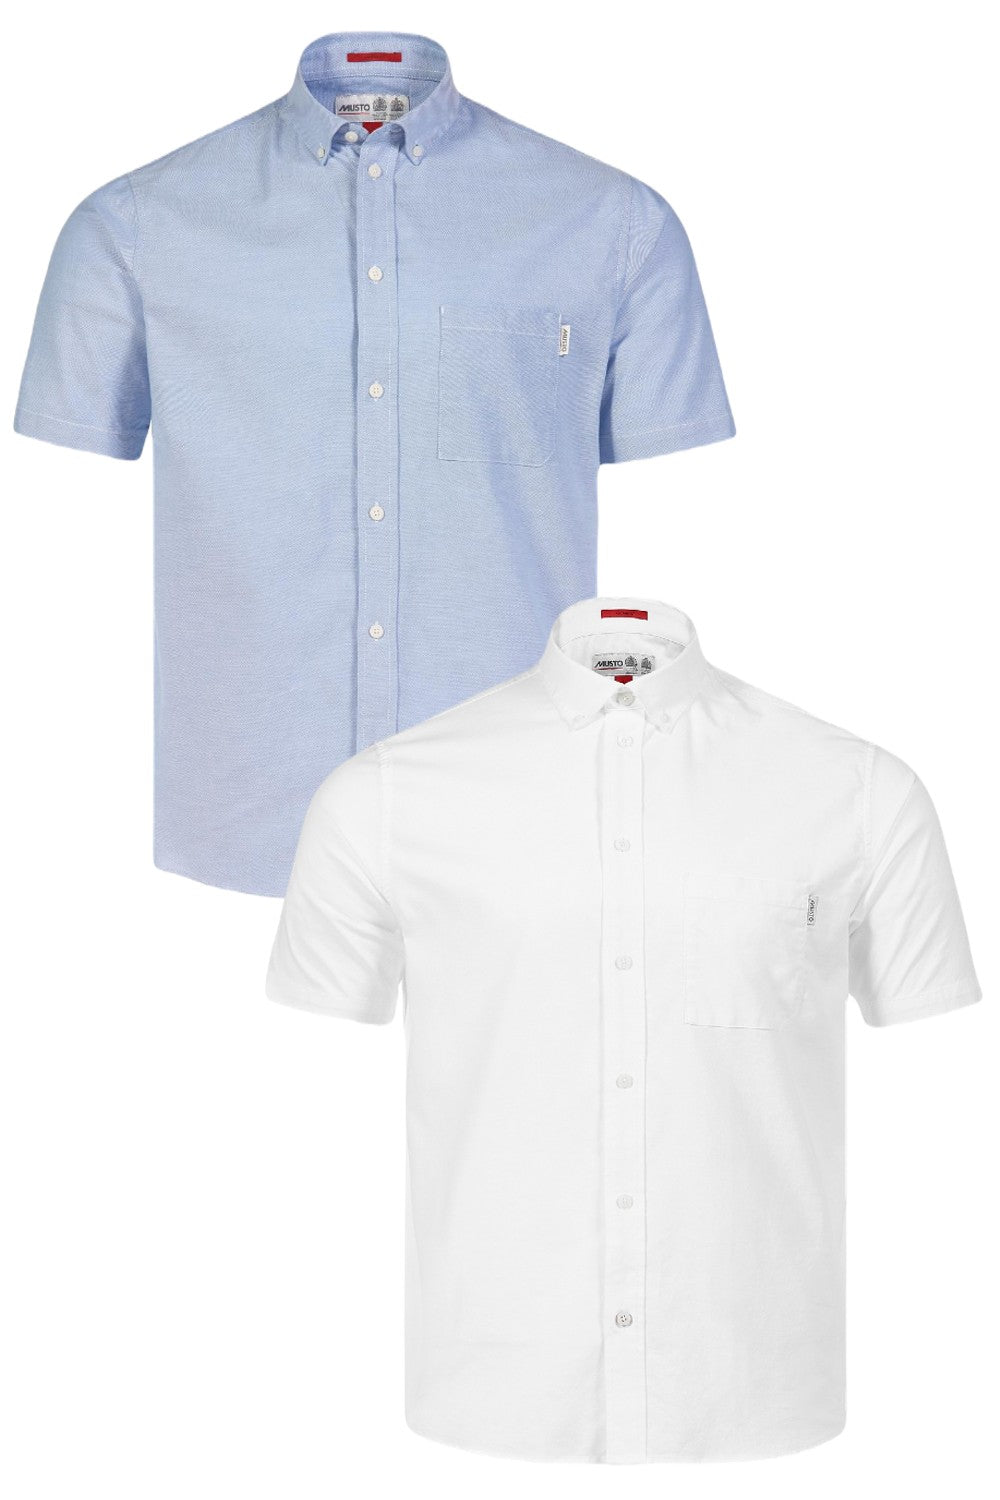 Musto Men Essential Short Sleeve Oxford Shirt In Pale Blue and White